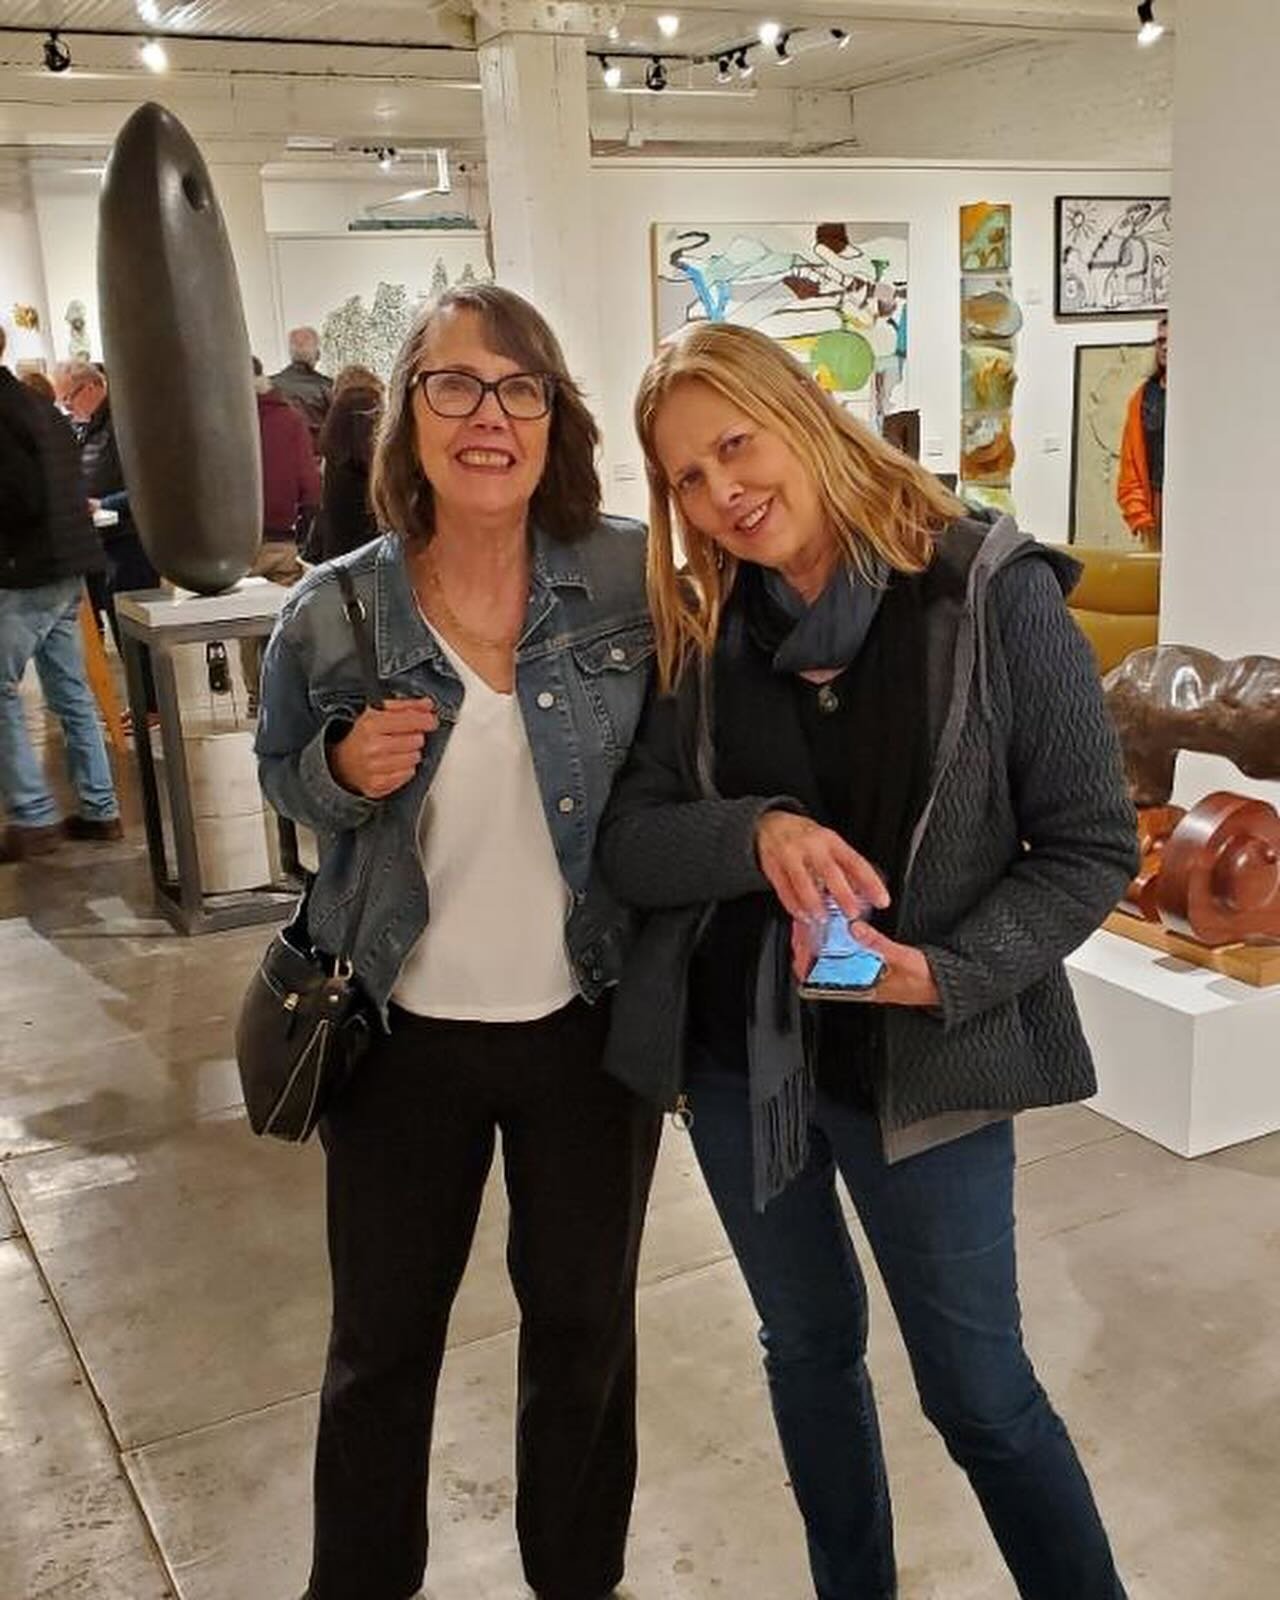 Fun Art adventures with my sister, Julie, last weekend in Chicago at Alma Art and Interiors for the opening of their Spring shows and this past Friday in Milwaukee at the grand opening of Kim Storage Gallery in Milwaukee . We met @kathleenwaterloo Ka